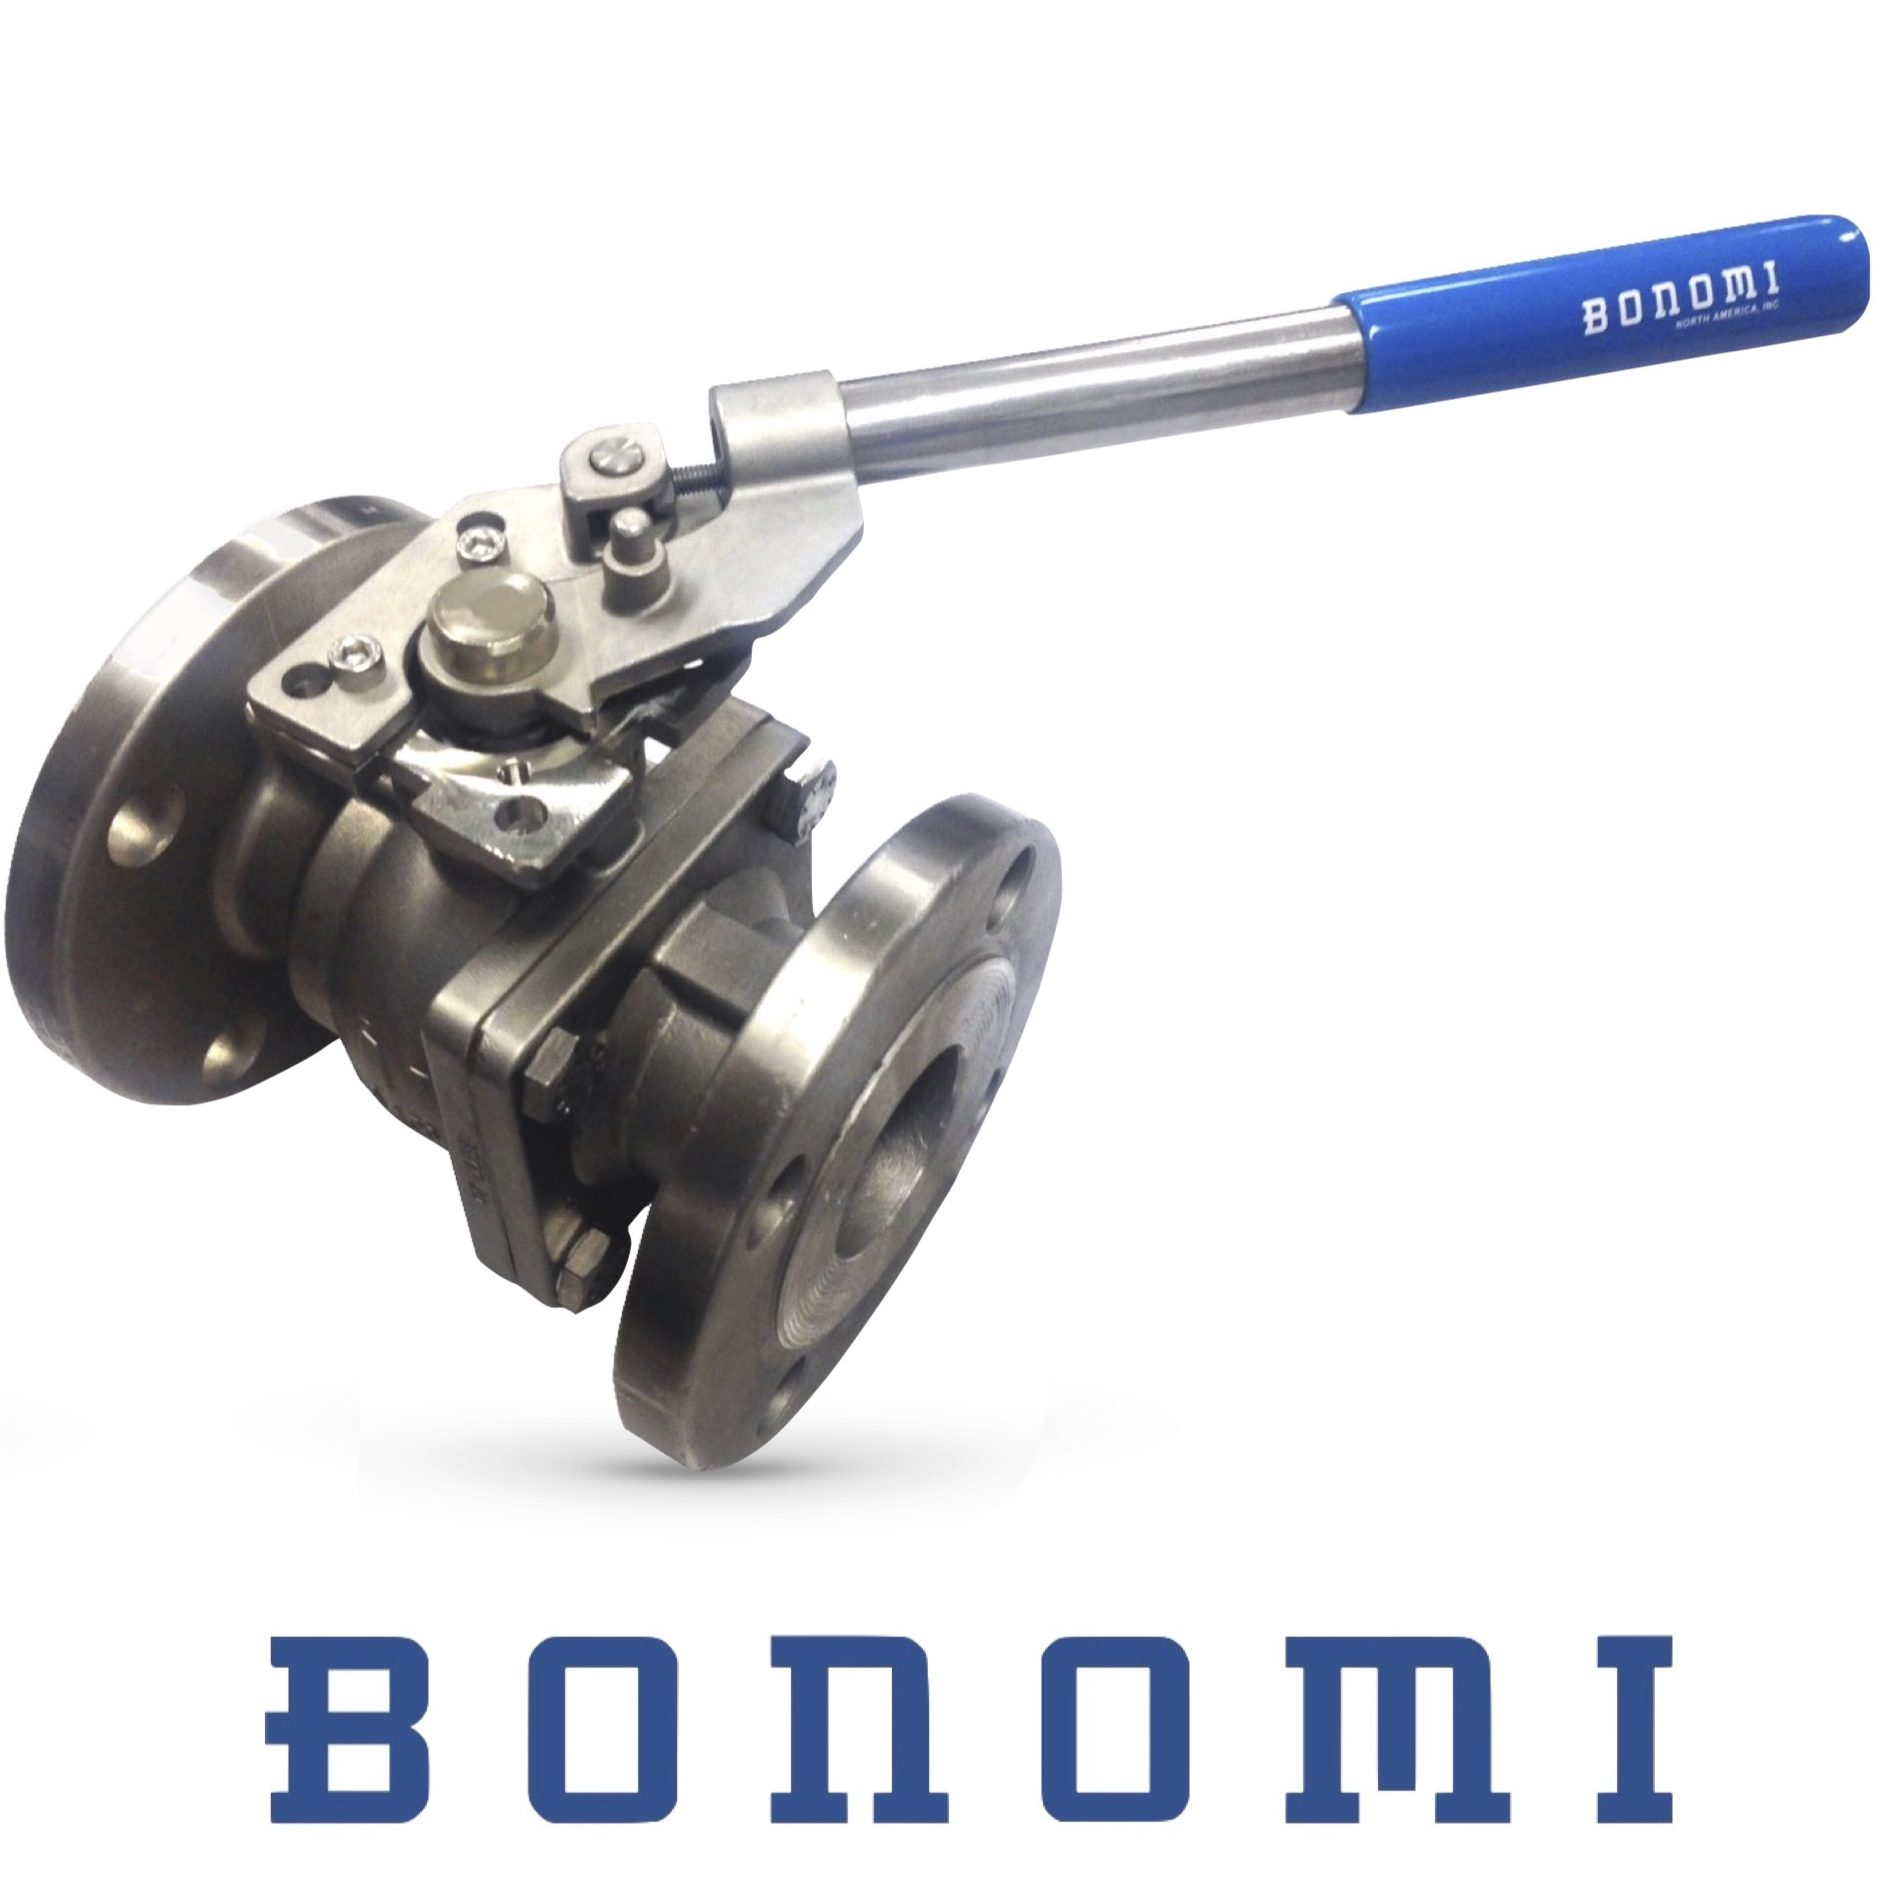 Bonomi stainless steel flanged ball valve with spring return handle